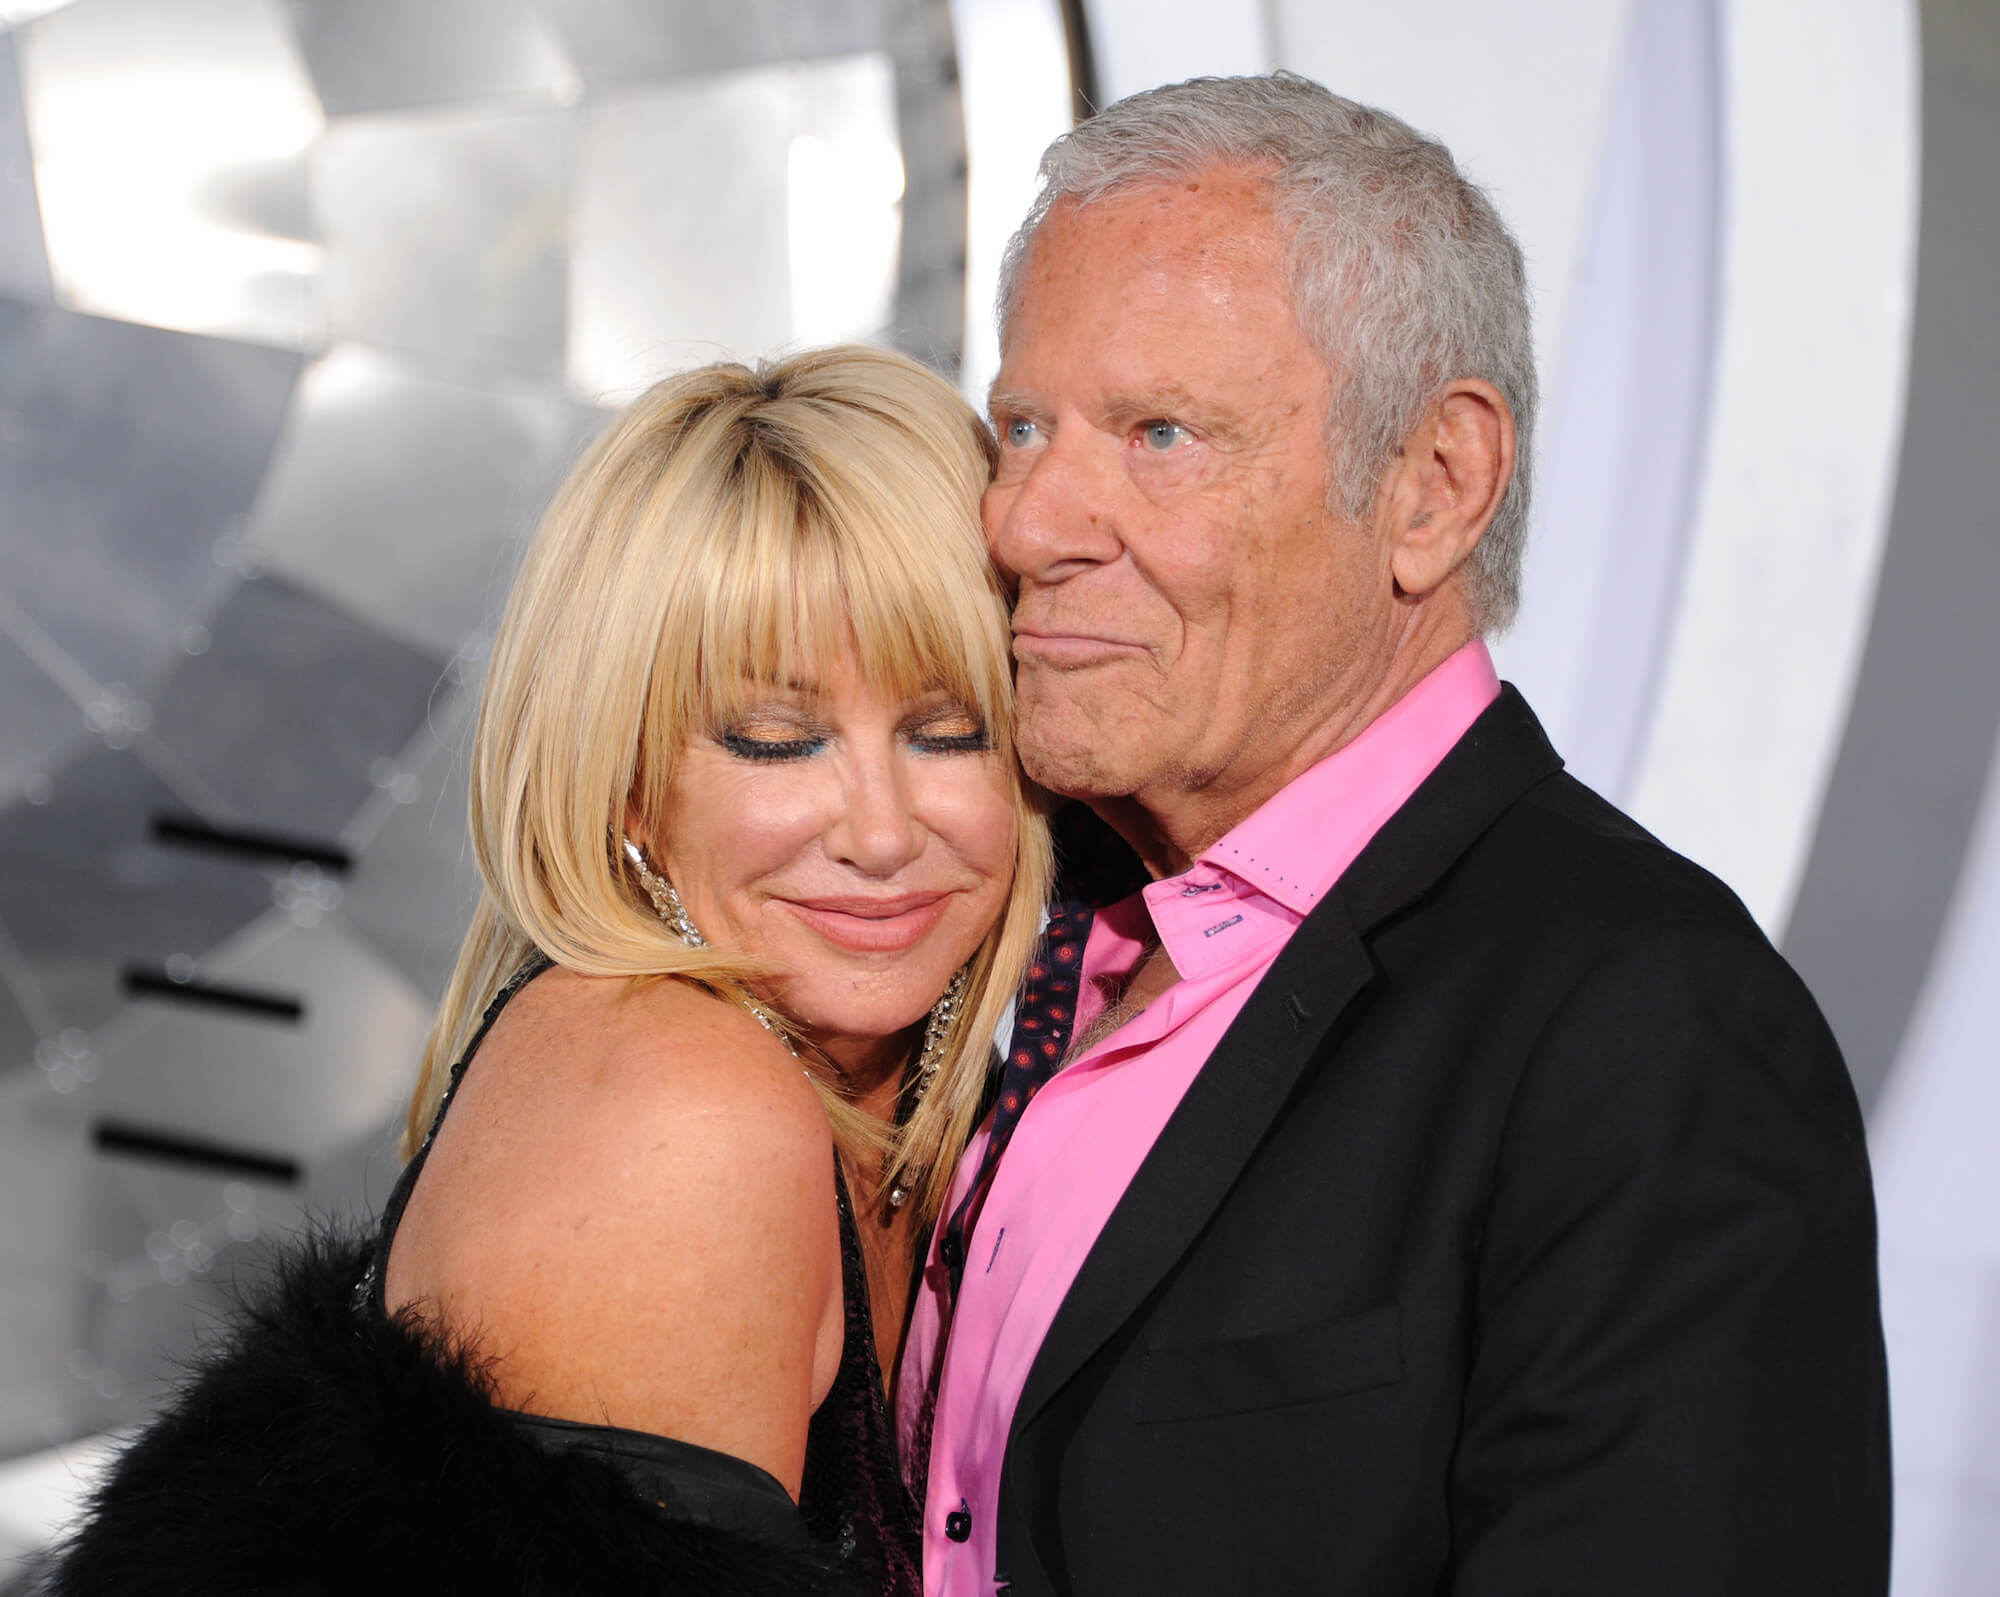 Suzanne Somers hugging her husband, Alan Hamel, with her eyes closed